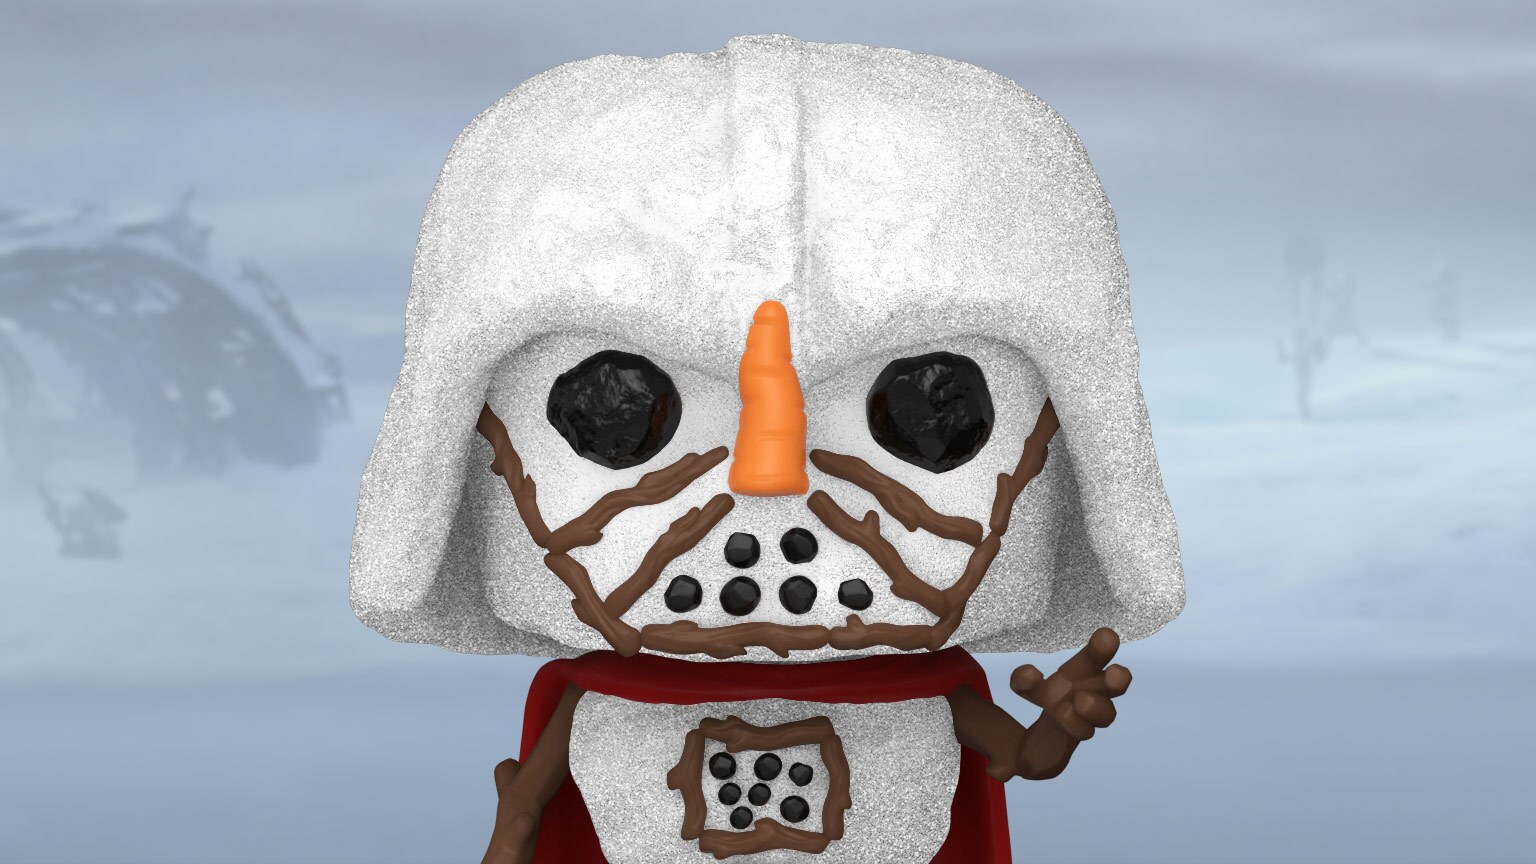 Star Wars Takes a Snow Day at Funko's Festival of Fun